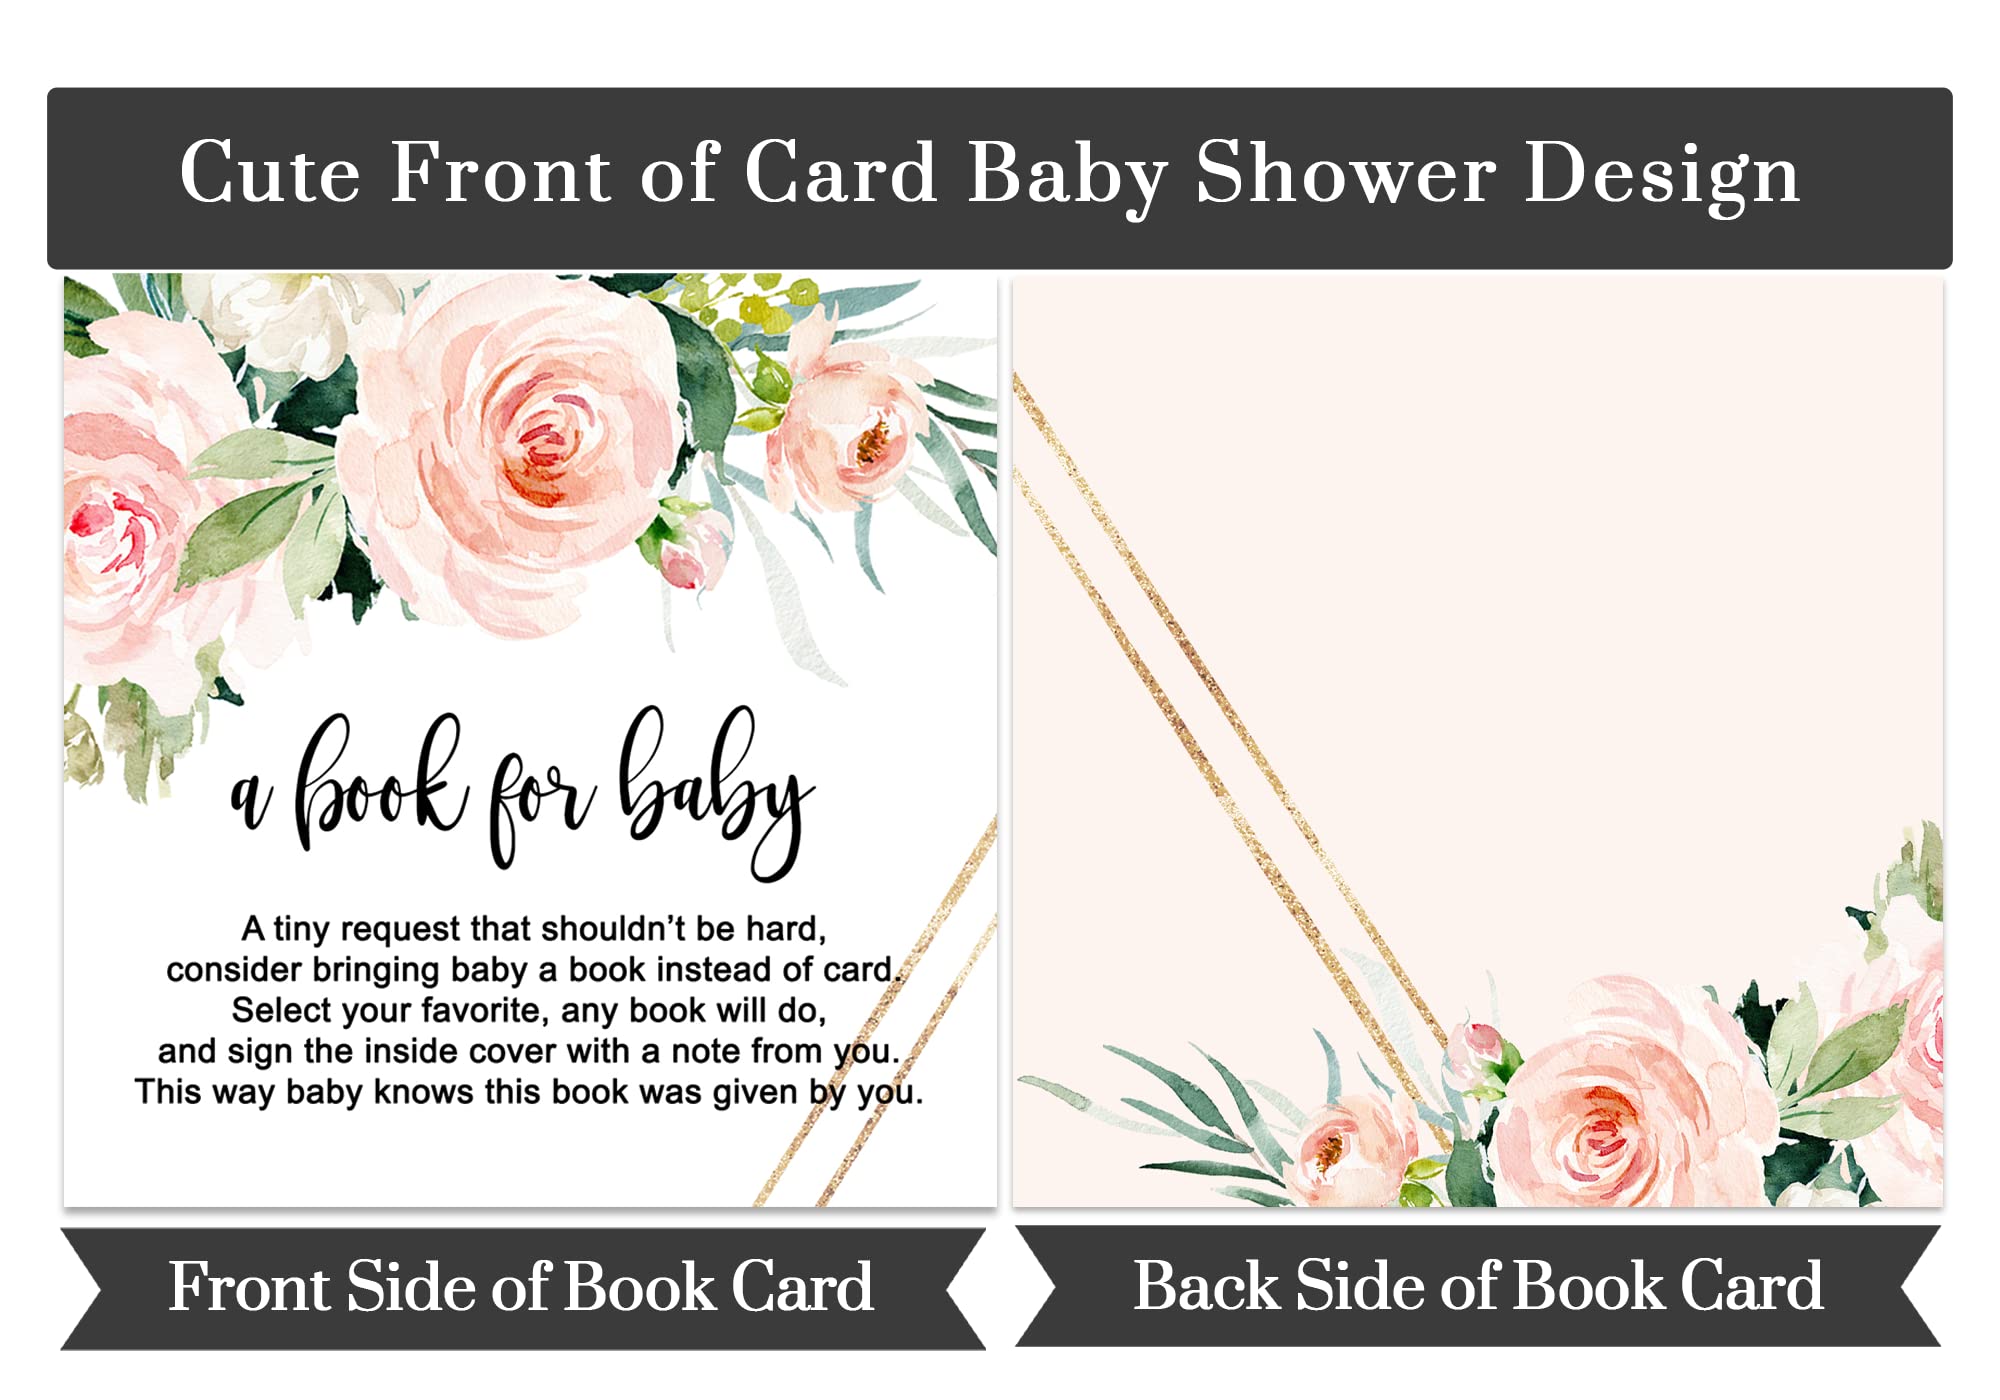 Paper Clever Party Graceful Floral Bring a Book Cards for Baby Shower (25 Pack) Bear Invitation Insert for Girls Parties – Rustic Theme Pink and Gold – 4x4 Printed Card Set